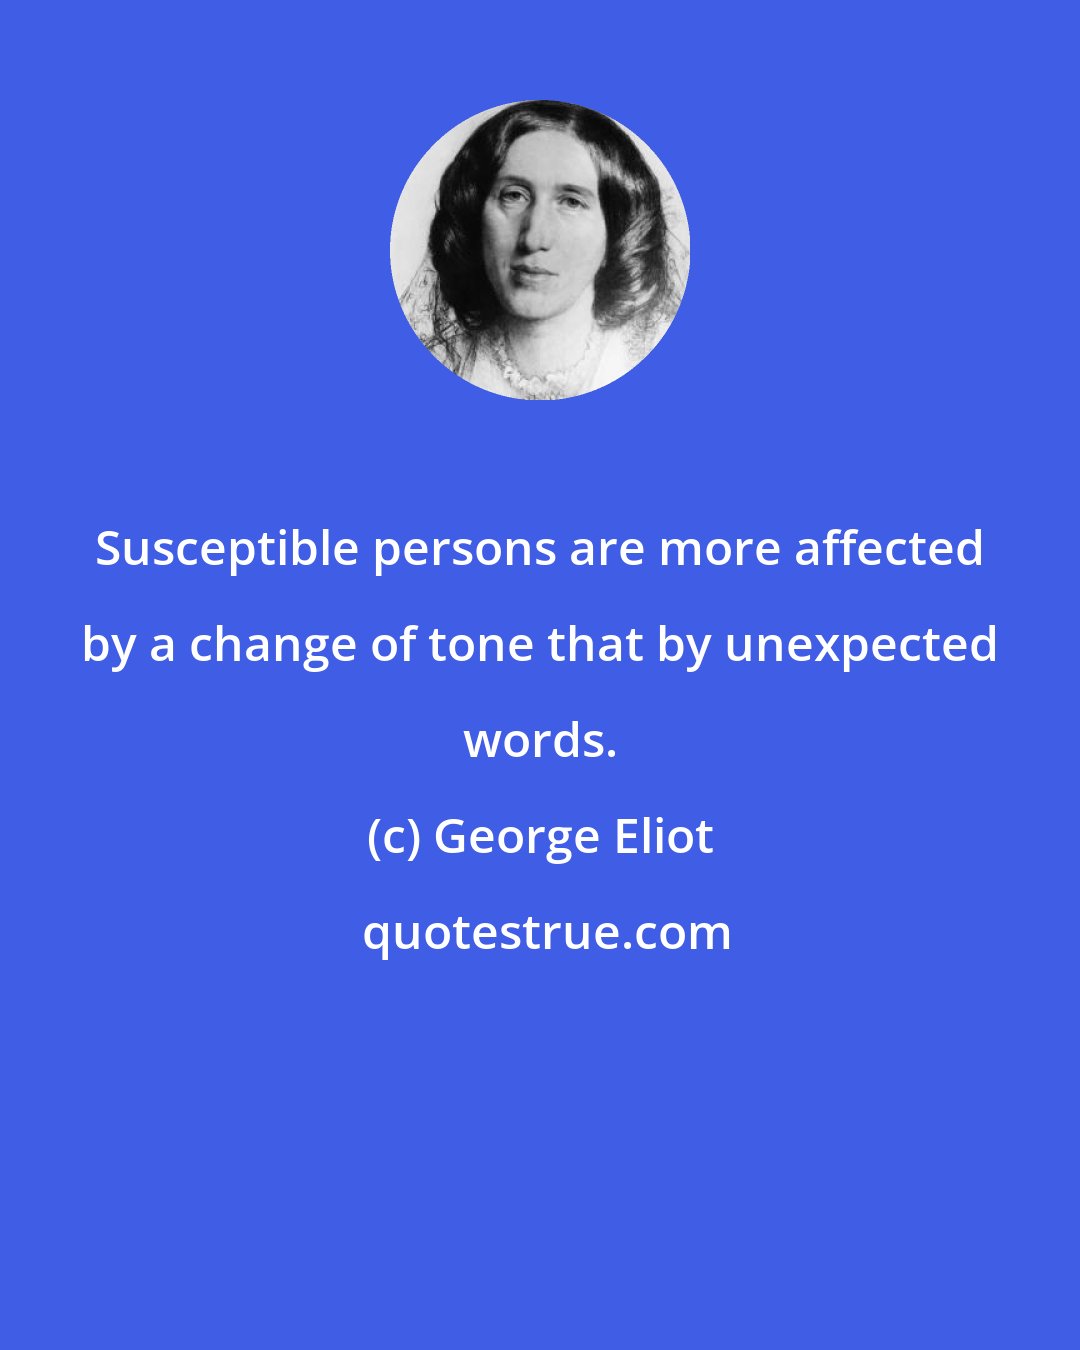 George Eliot: Susceptible persons are more affected by a change of tone that by unexpected words.